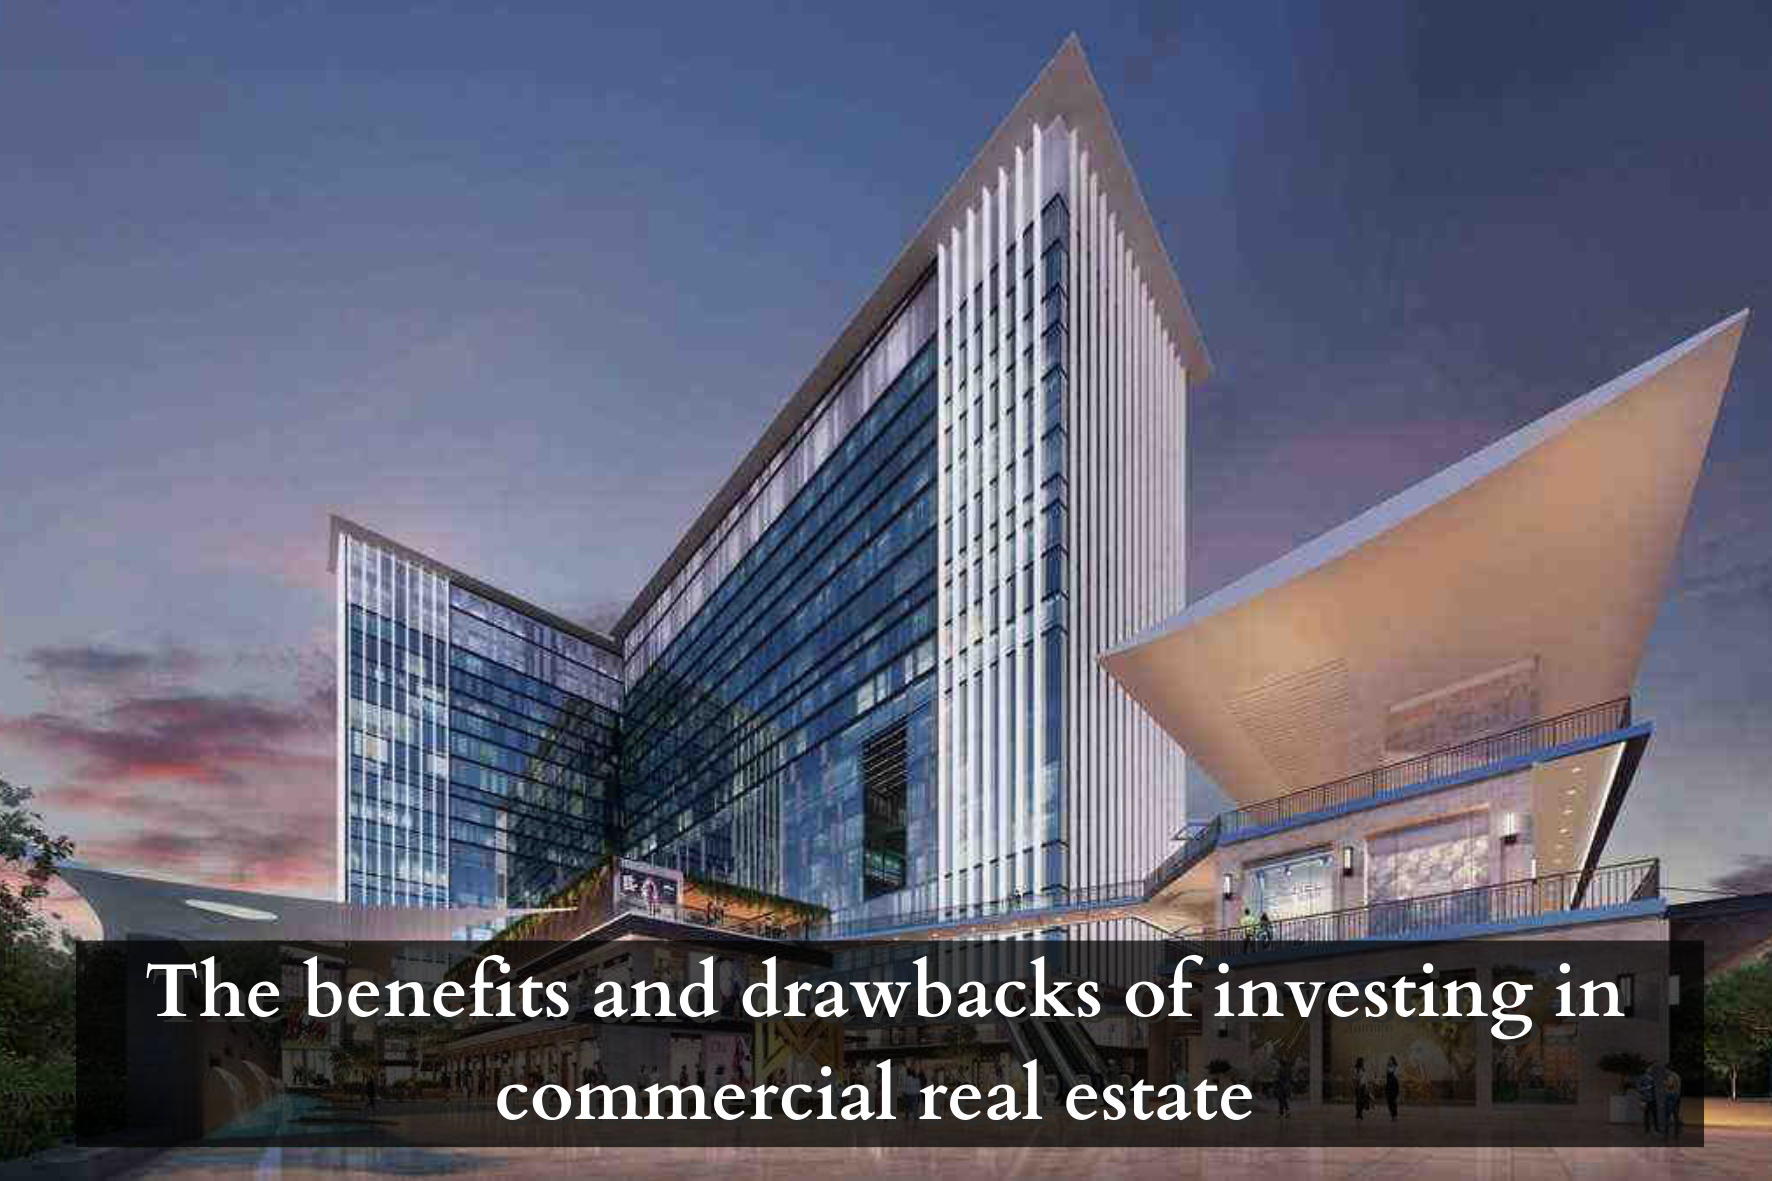 uploads/blog/The_benefits_and_drawbacks_of_investing_in_commercial_real_estate.png